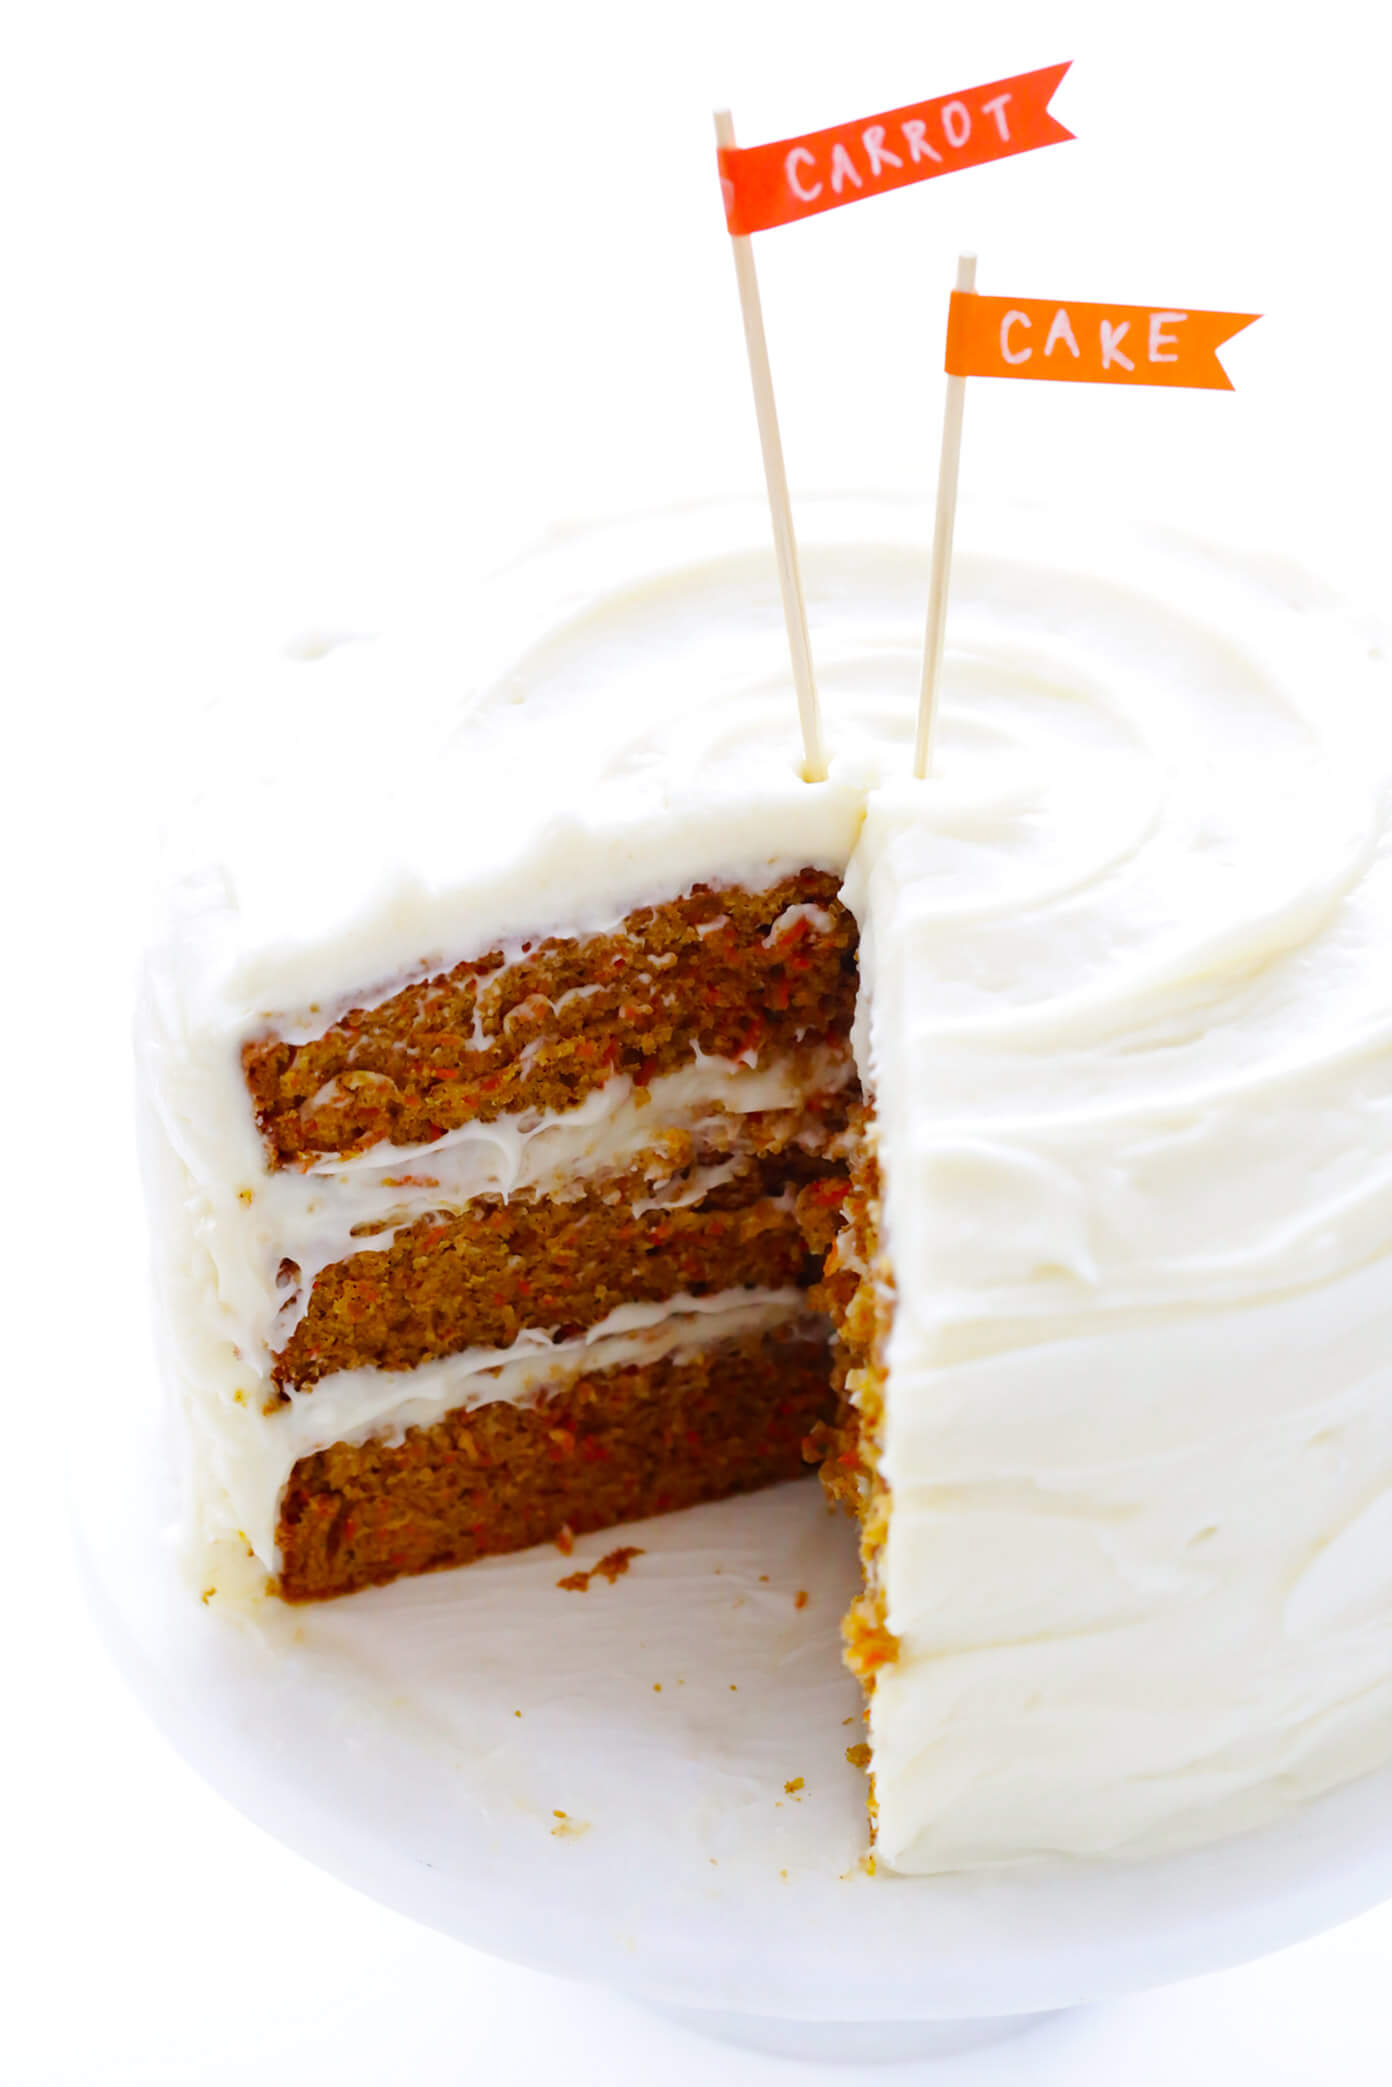 A classic carrot cake with a touch of Easter.  Source: Gimme Some Oven